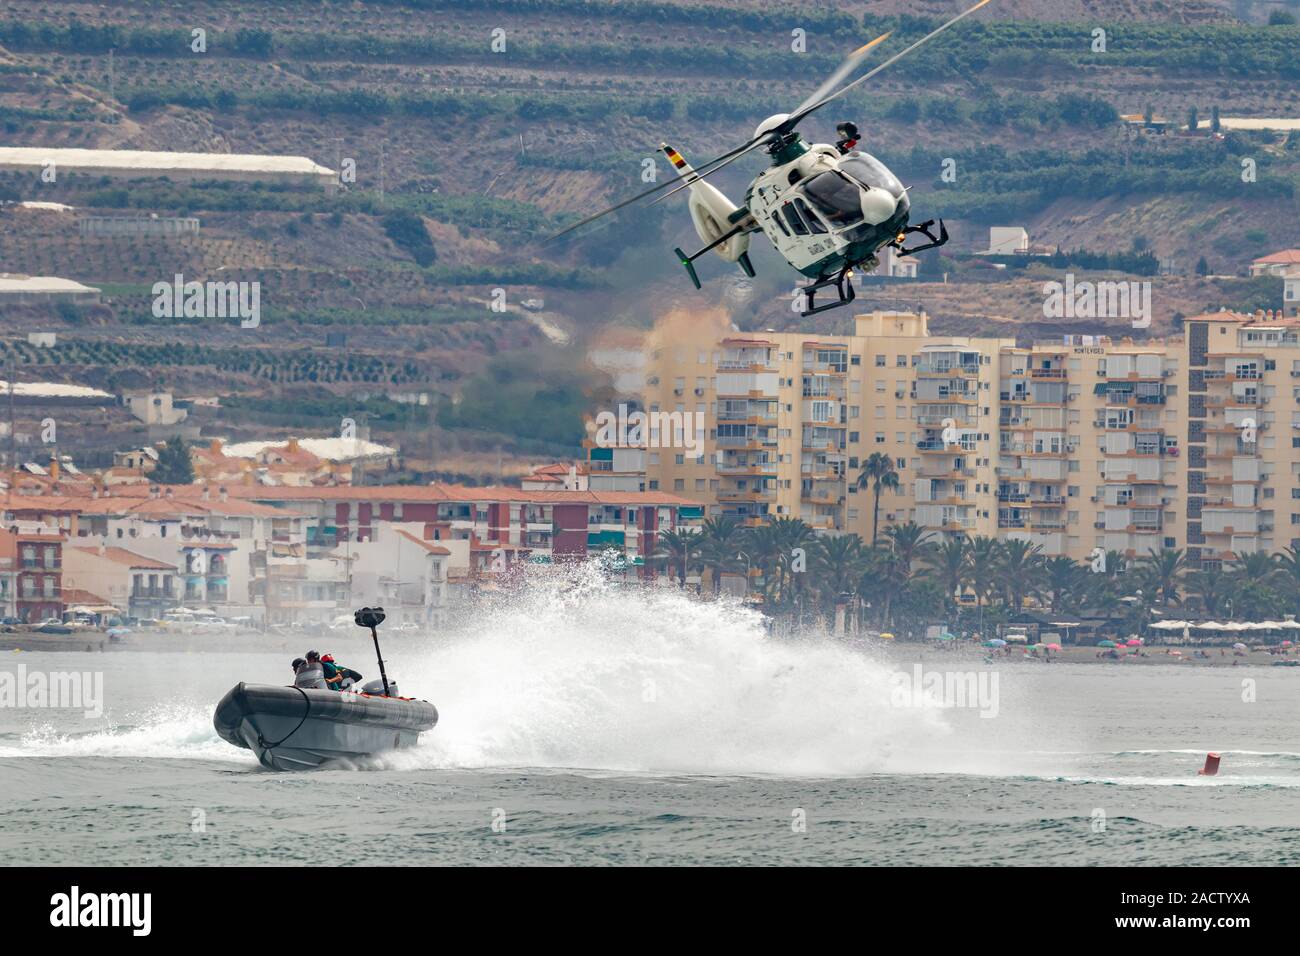 TORRE DEL MAR, MALAGA, SPAIN-JUL 12: Guardia Civil coast guard patrol and helicopter EC-135 taking part in a exhibition on the 4th airshow of Torre de Stock Photo